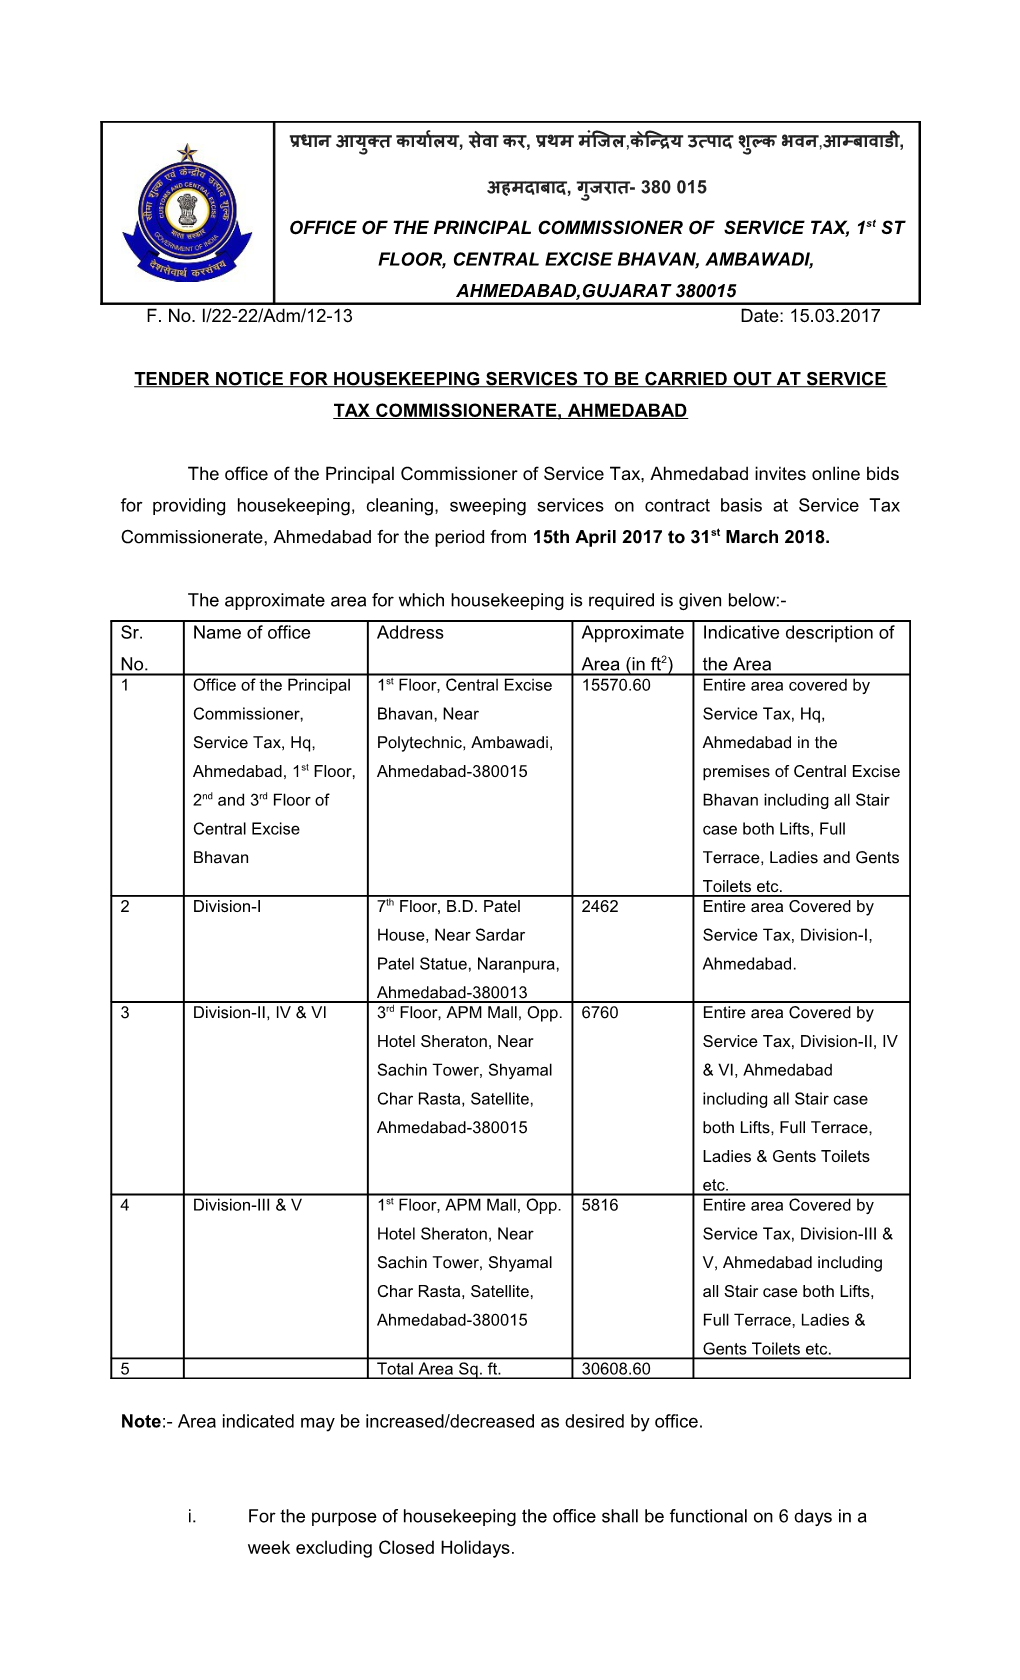 Tender Notice for Housekeeping Services to Be Carried out at Service Tax Commissionerate